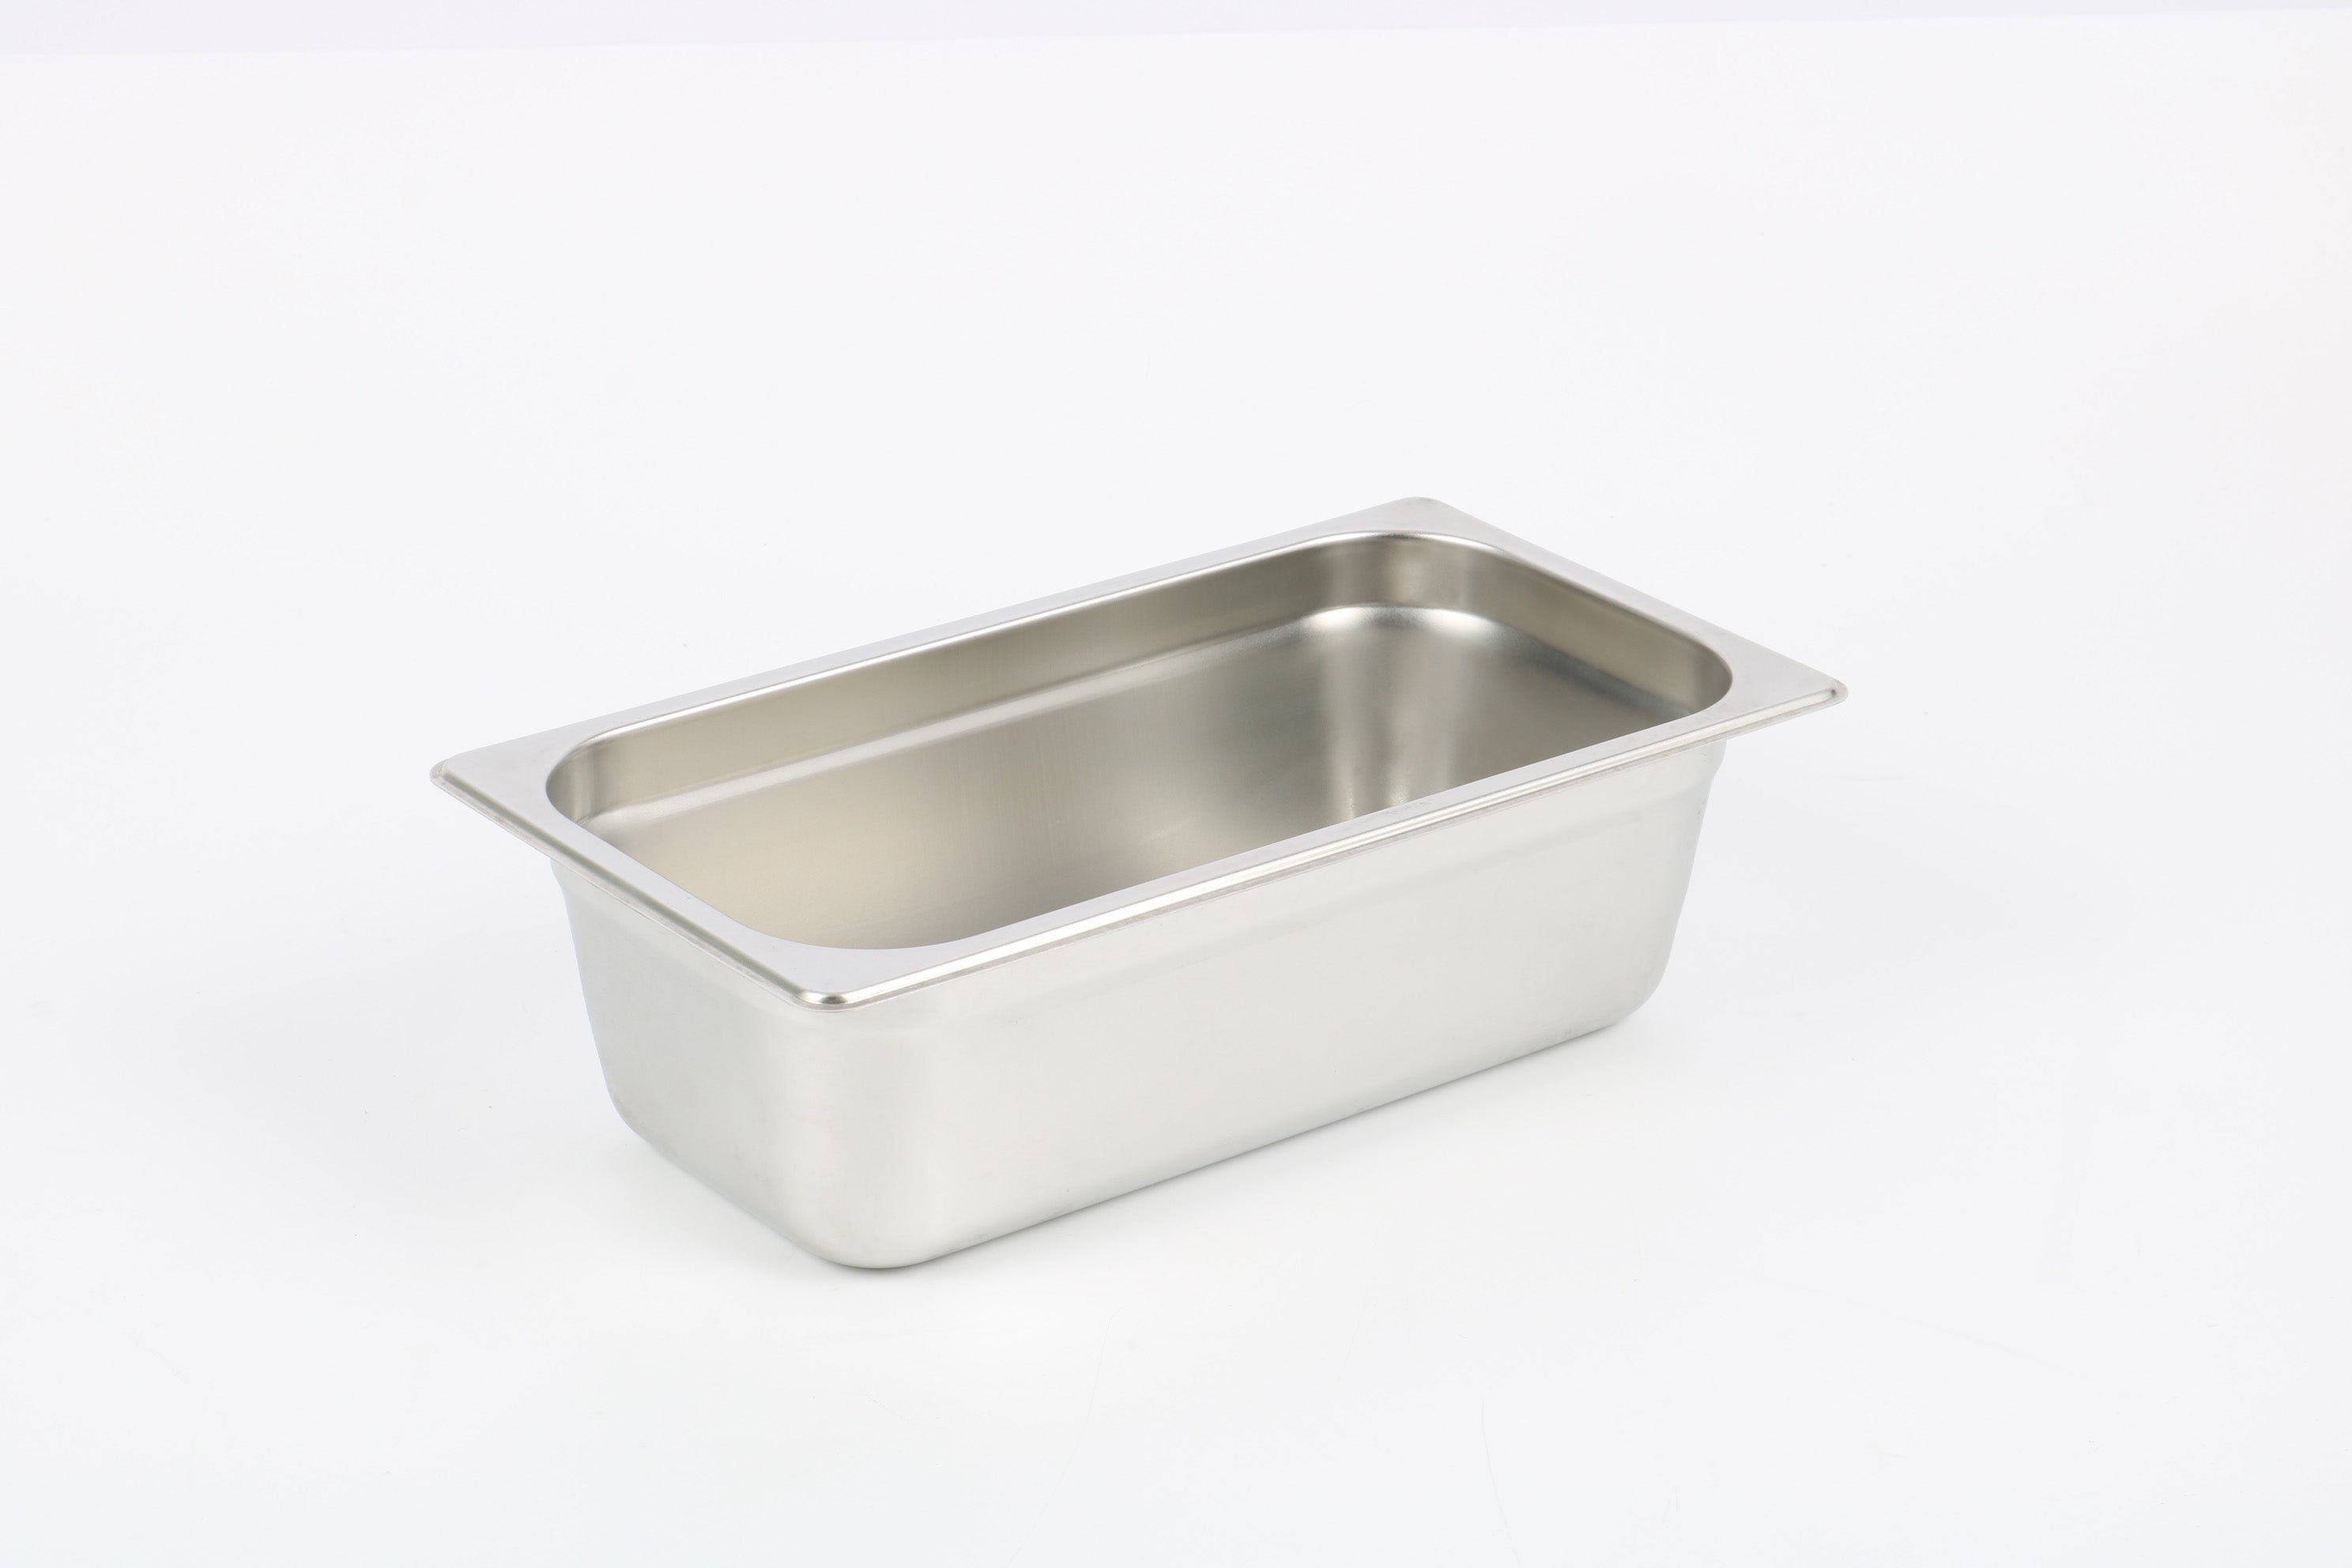 Katermaster Anti Jam Gastronorm Pan 1/3 Stainless Steel - Each Kitchen Equipment  